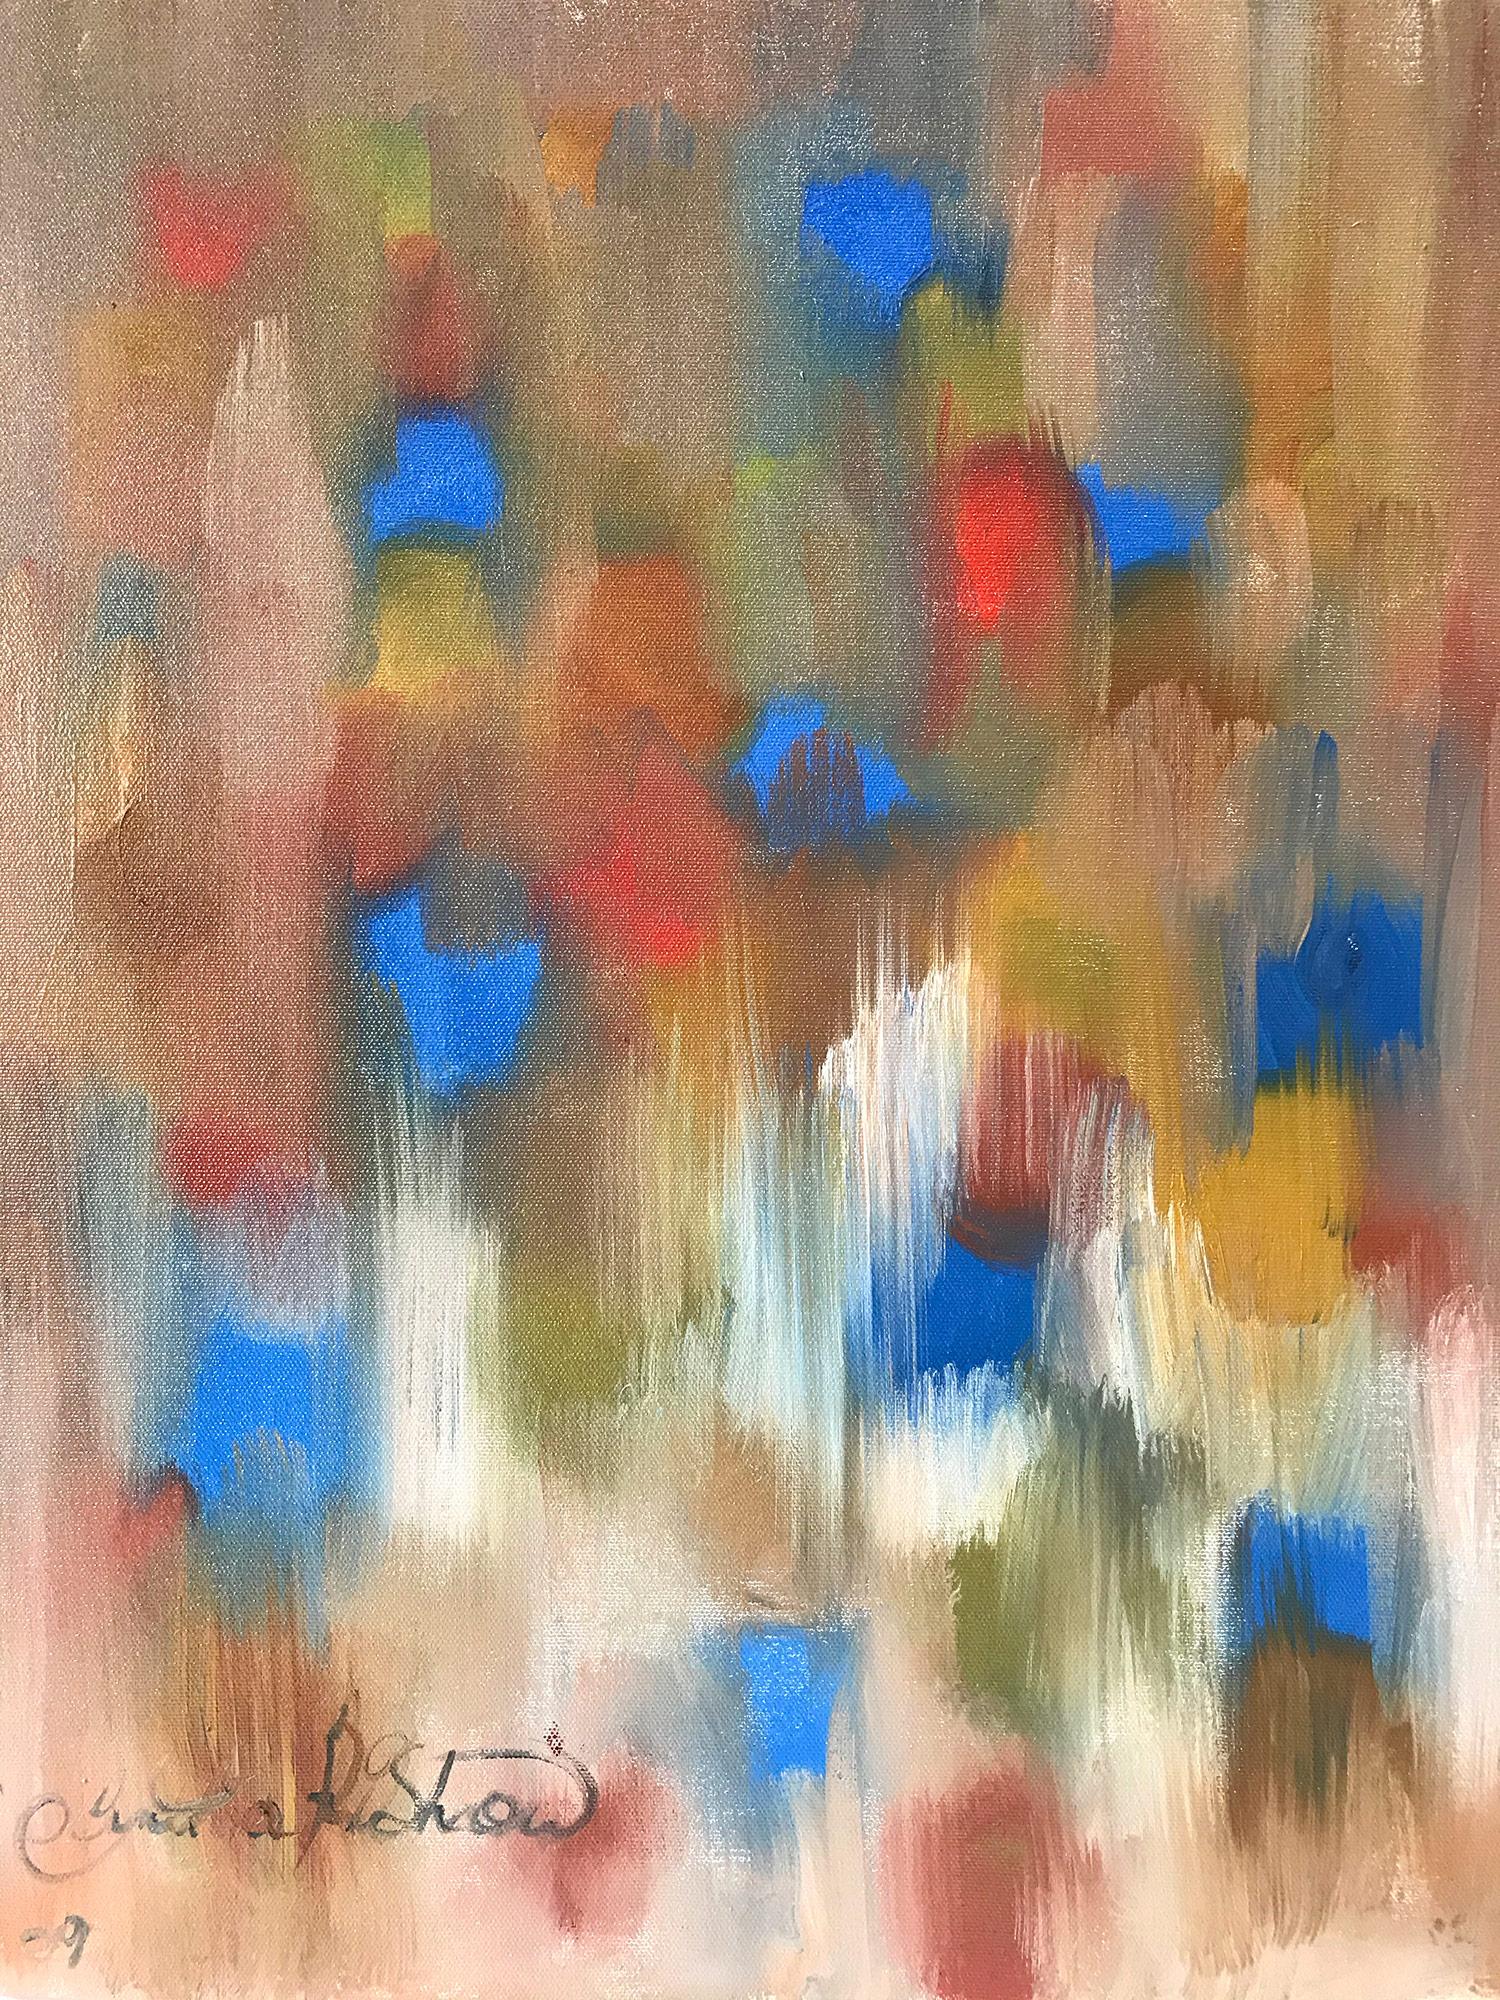 Cindy Shaoul Abstract Painting - “Dripping Dots - Electric Kiss” Colorful Contemporary Oil Painting on Canvas